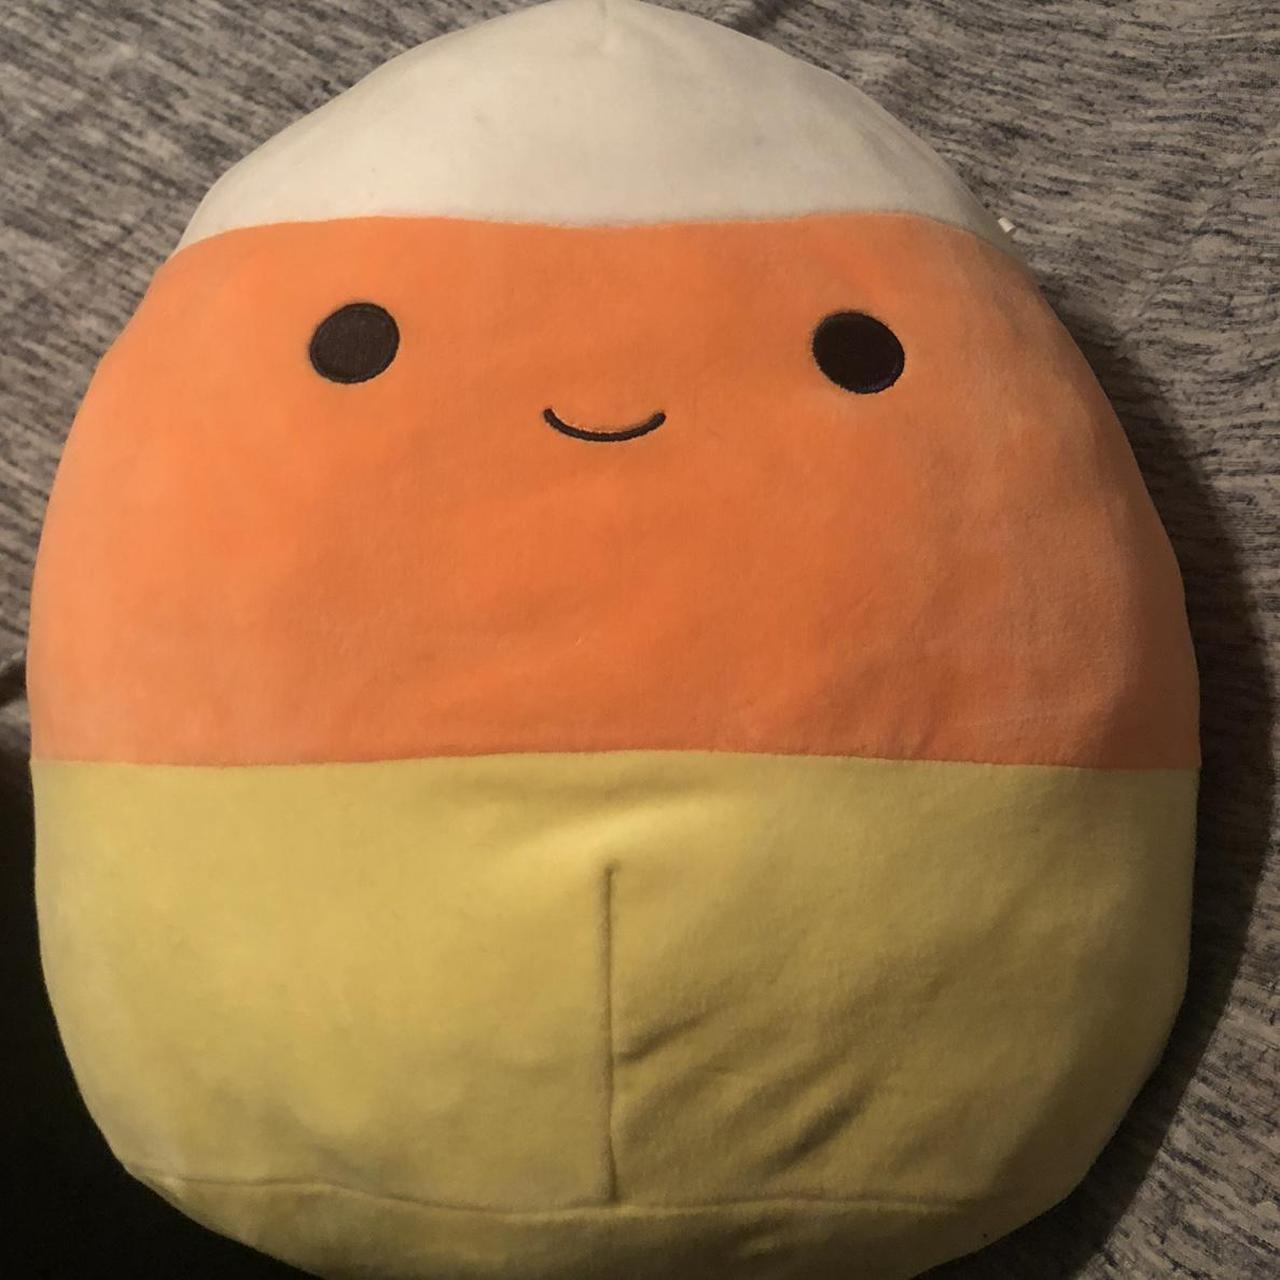 Product Image 1 - 2019 12in cannon squishmallow

new with